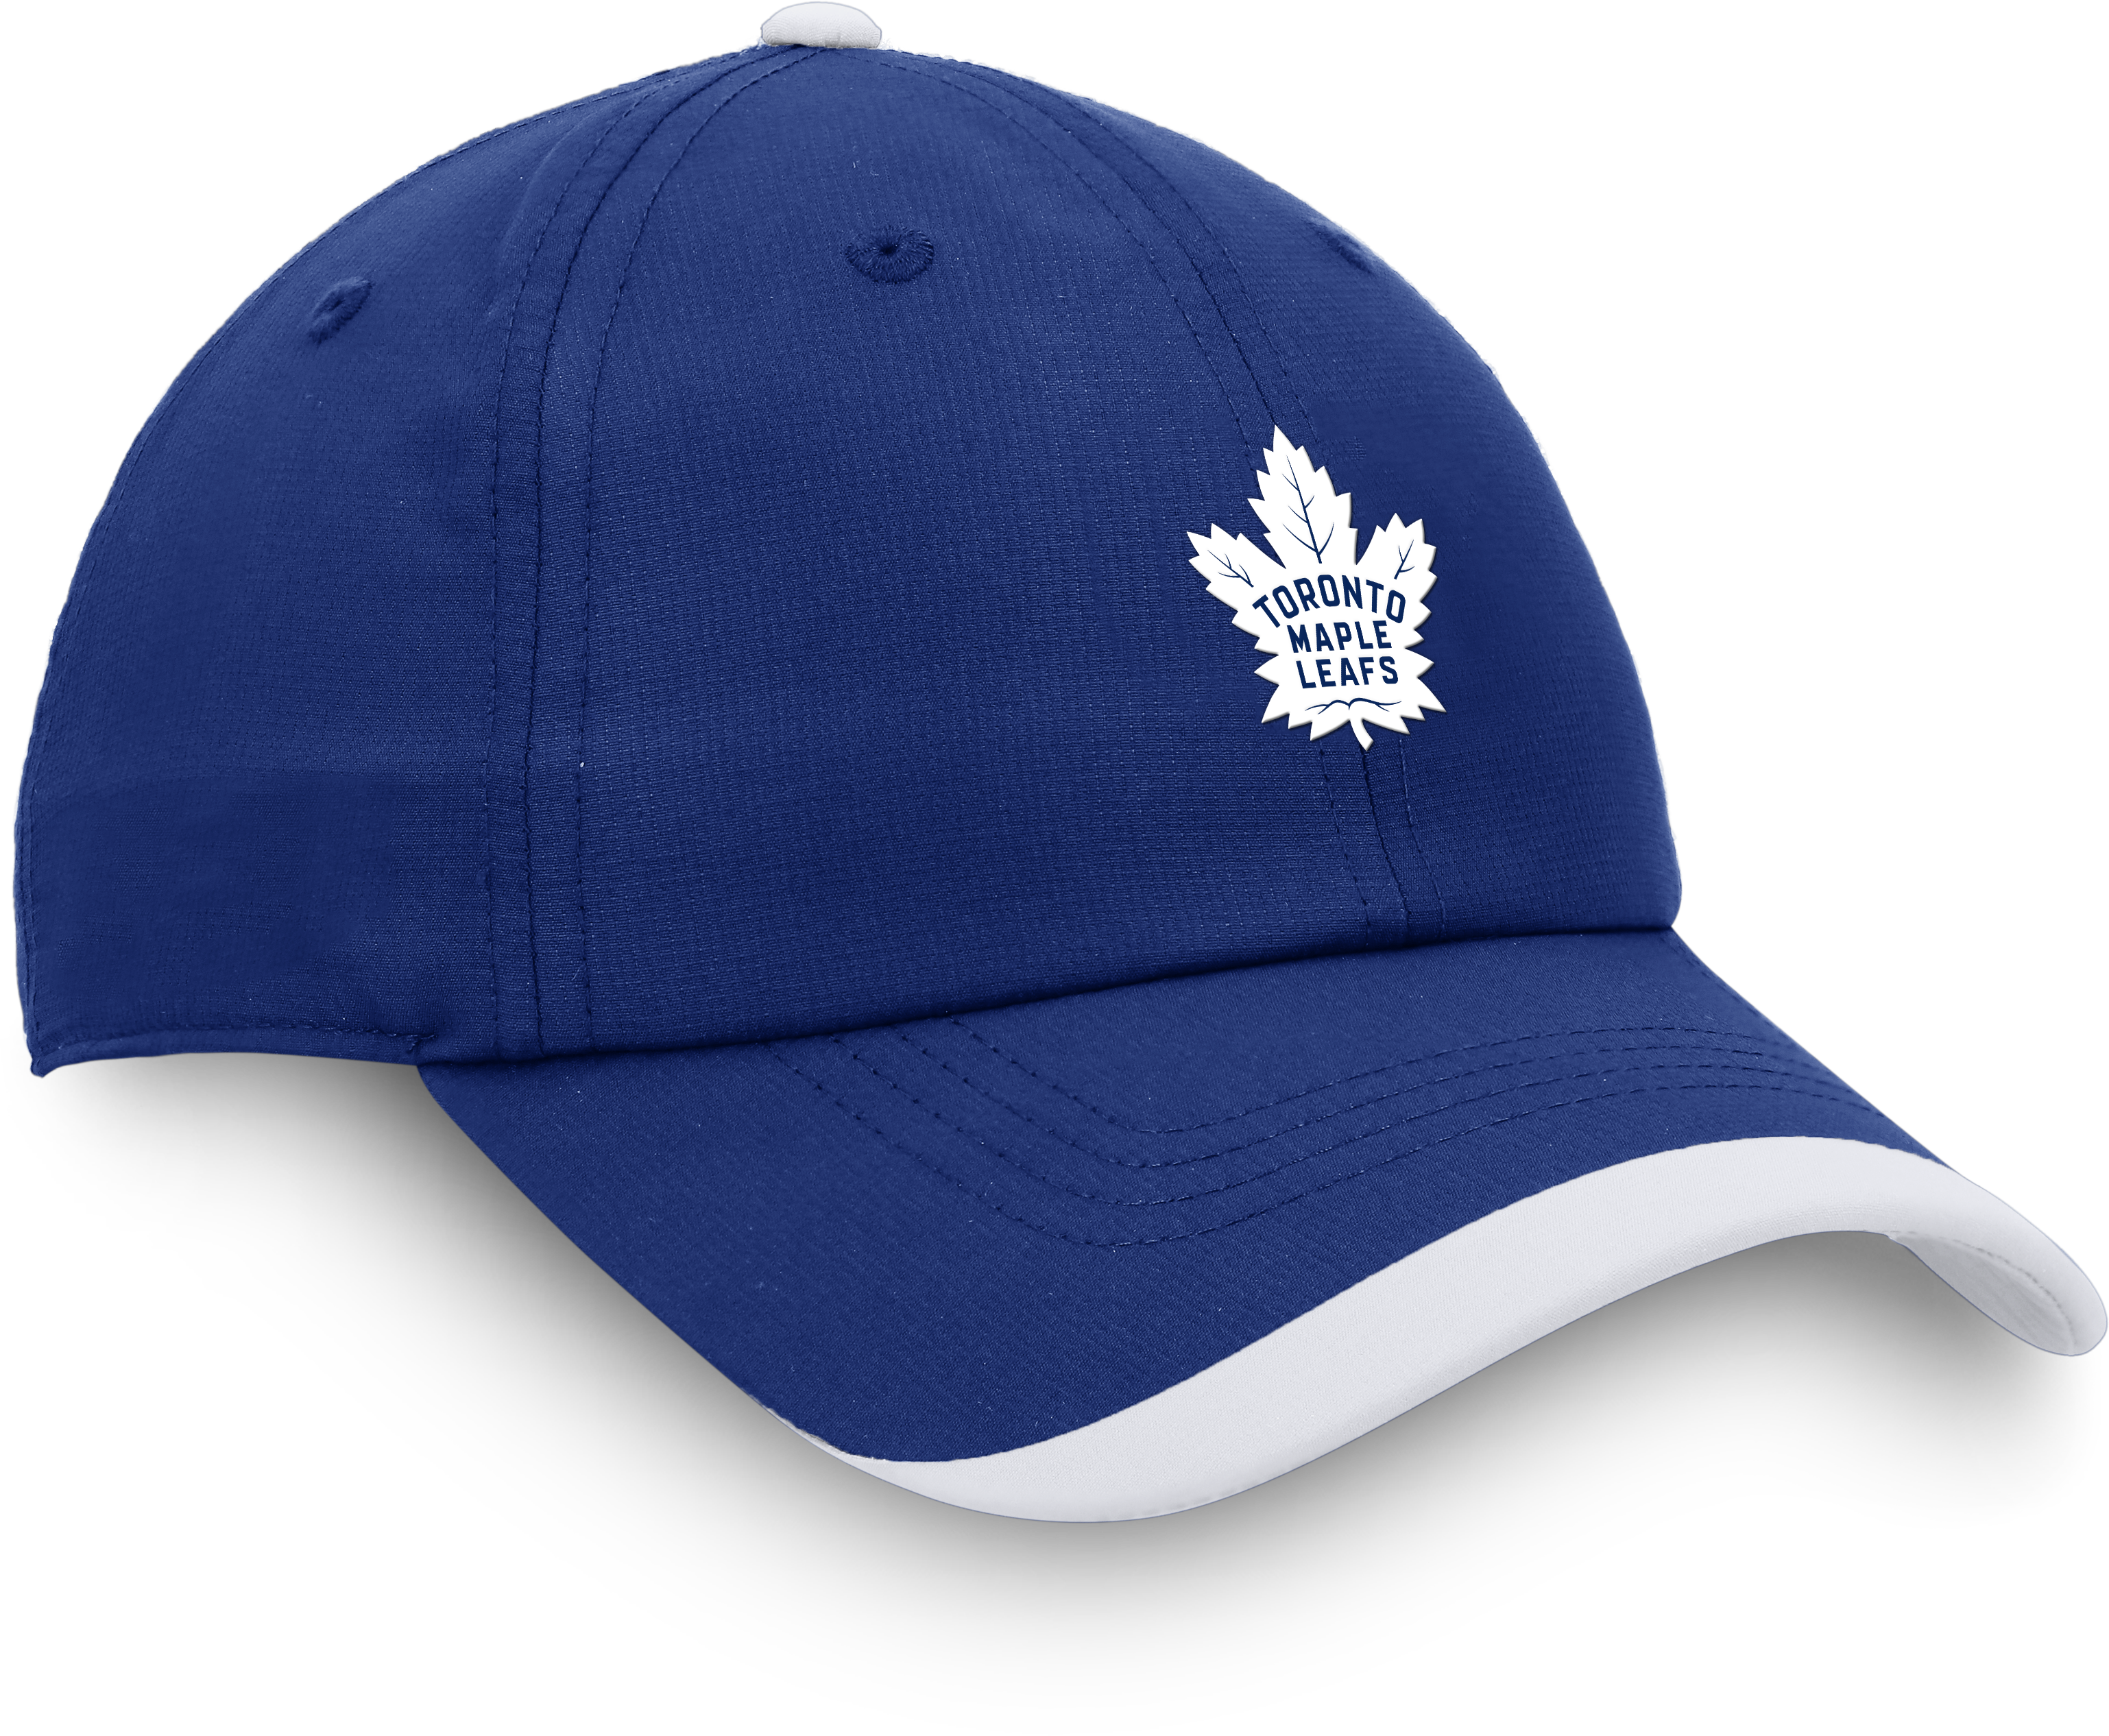 PRO STOCK ST PATS Toronto Maple Leafs Hat NWT Adjustable New Green